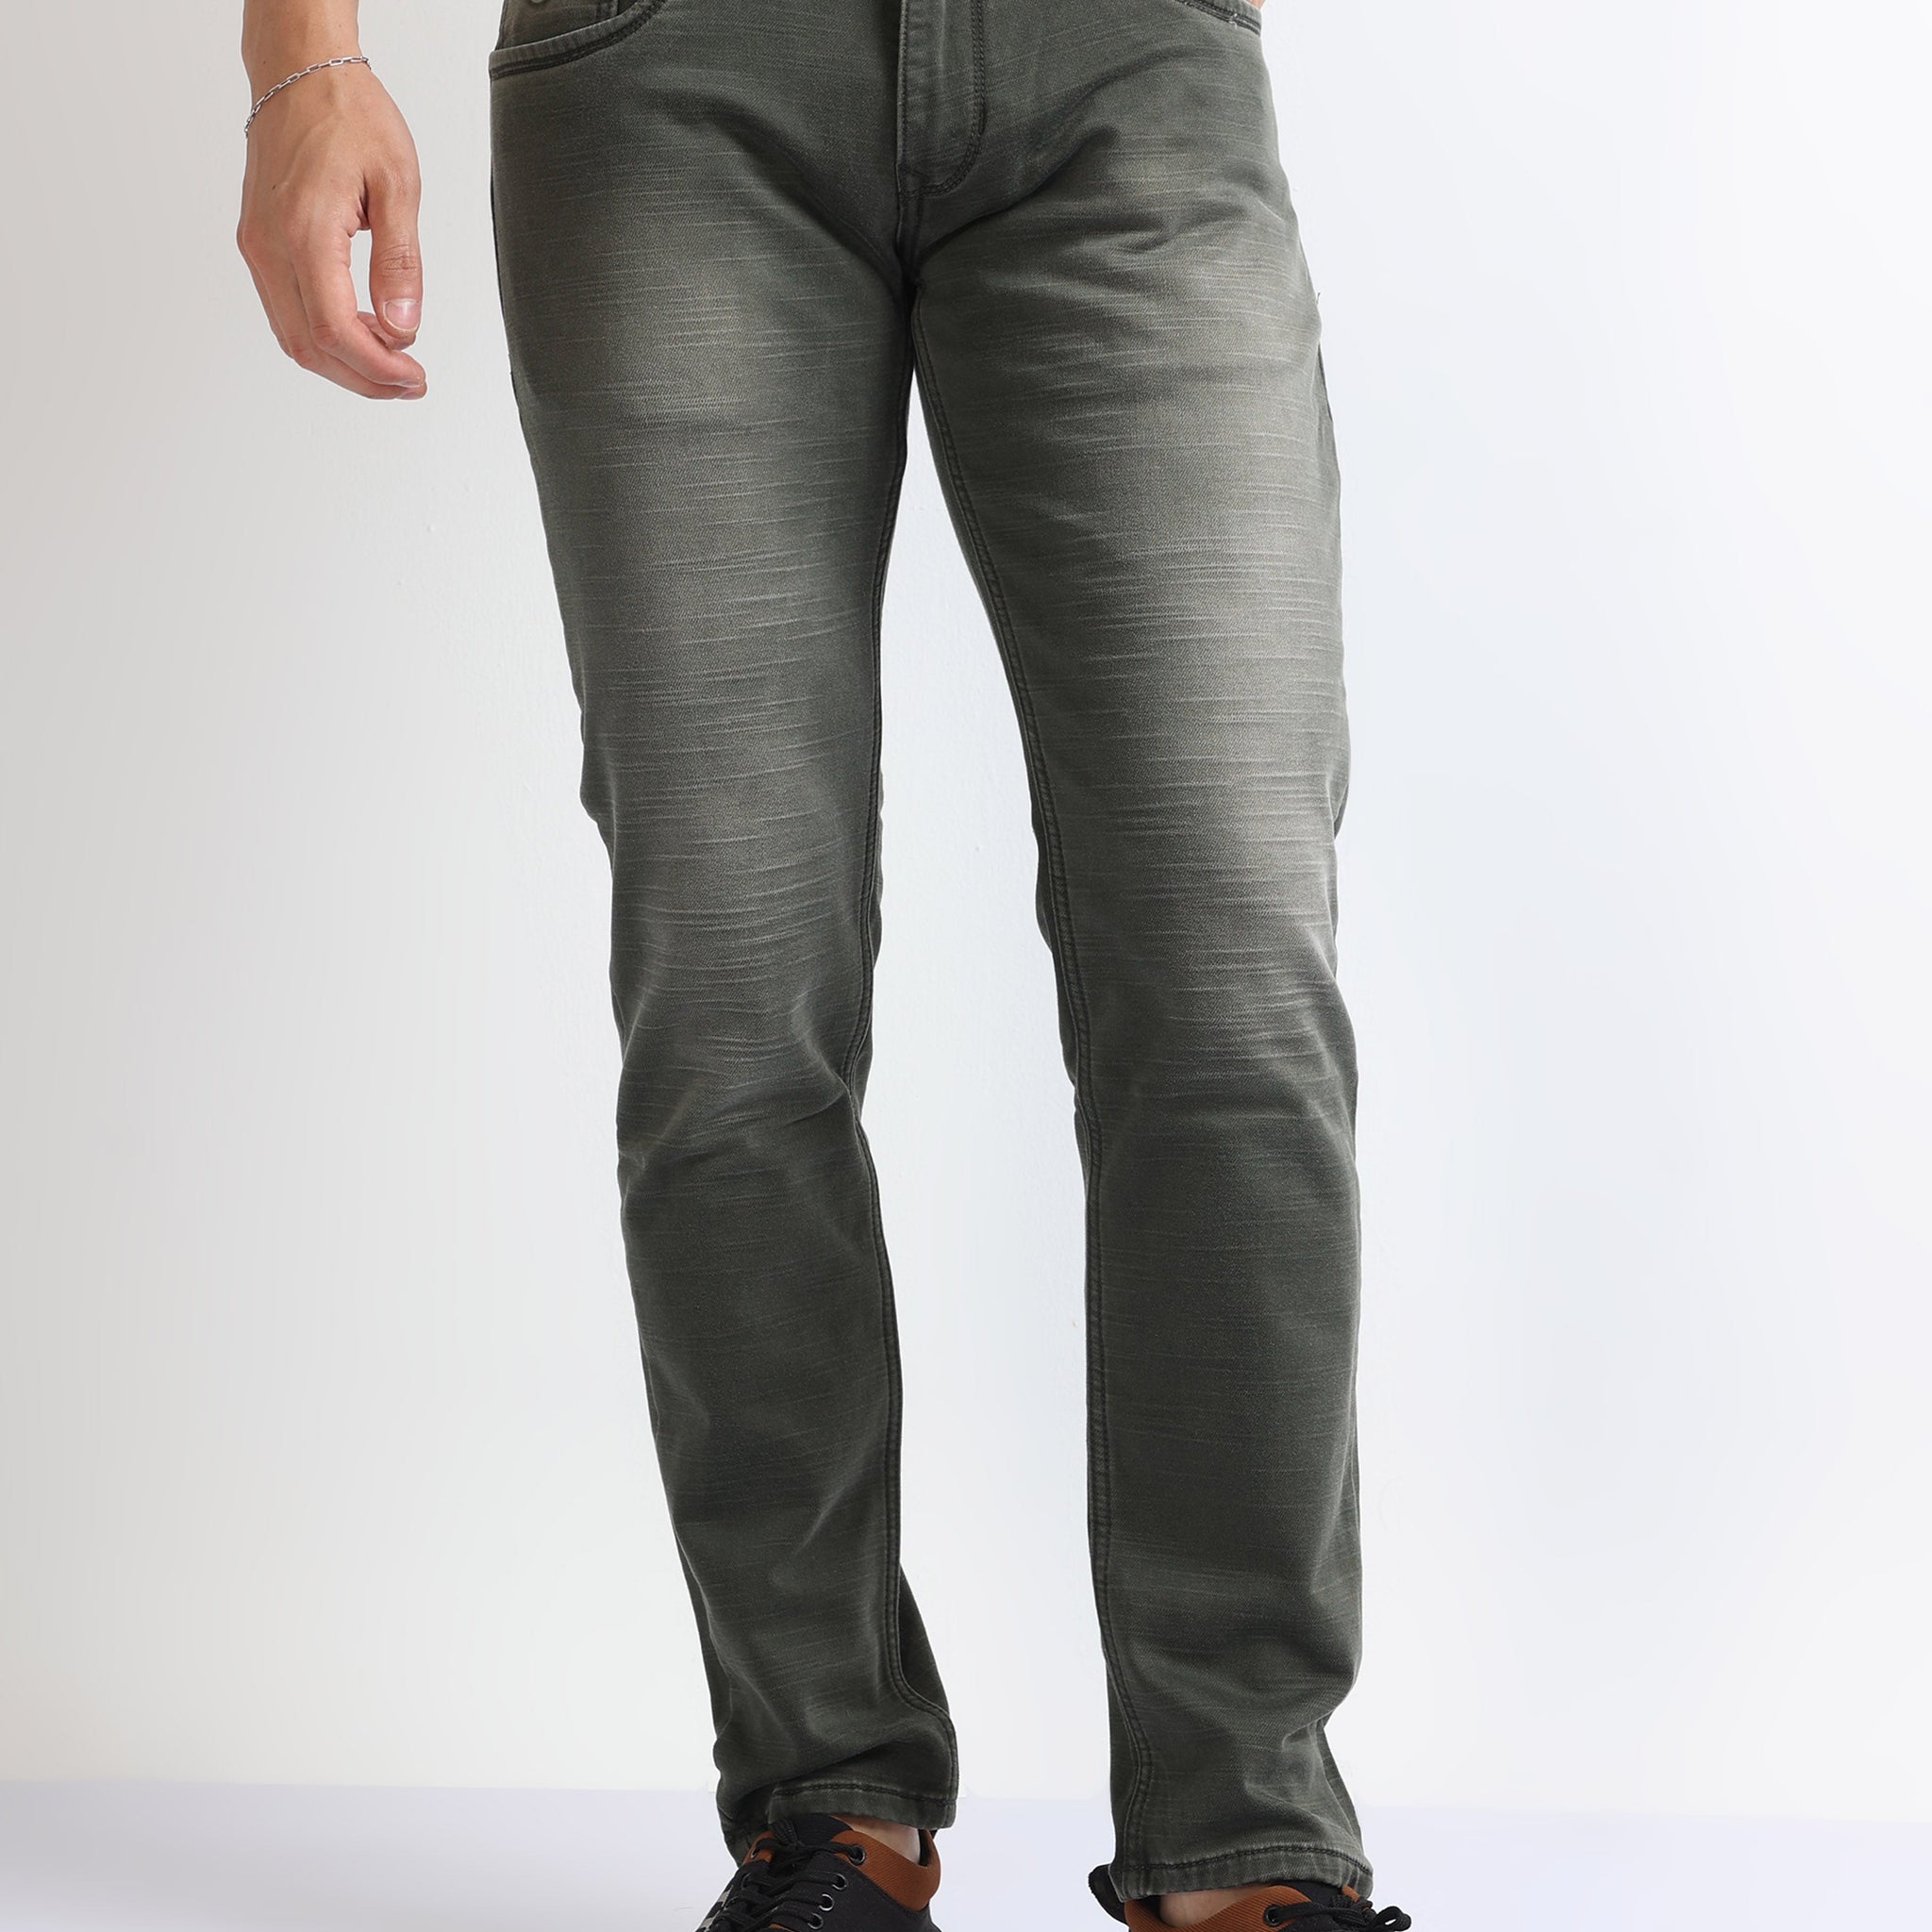 Green Colored Textured Men's Jeans